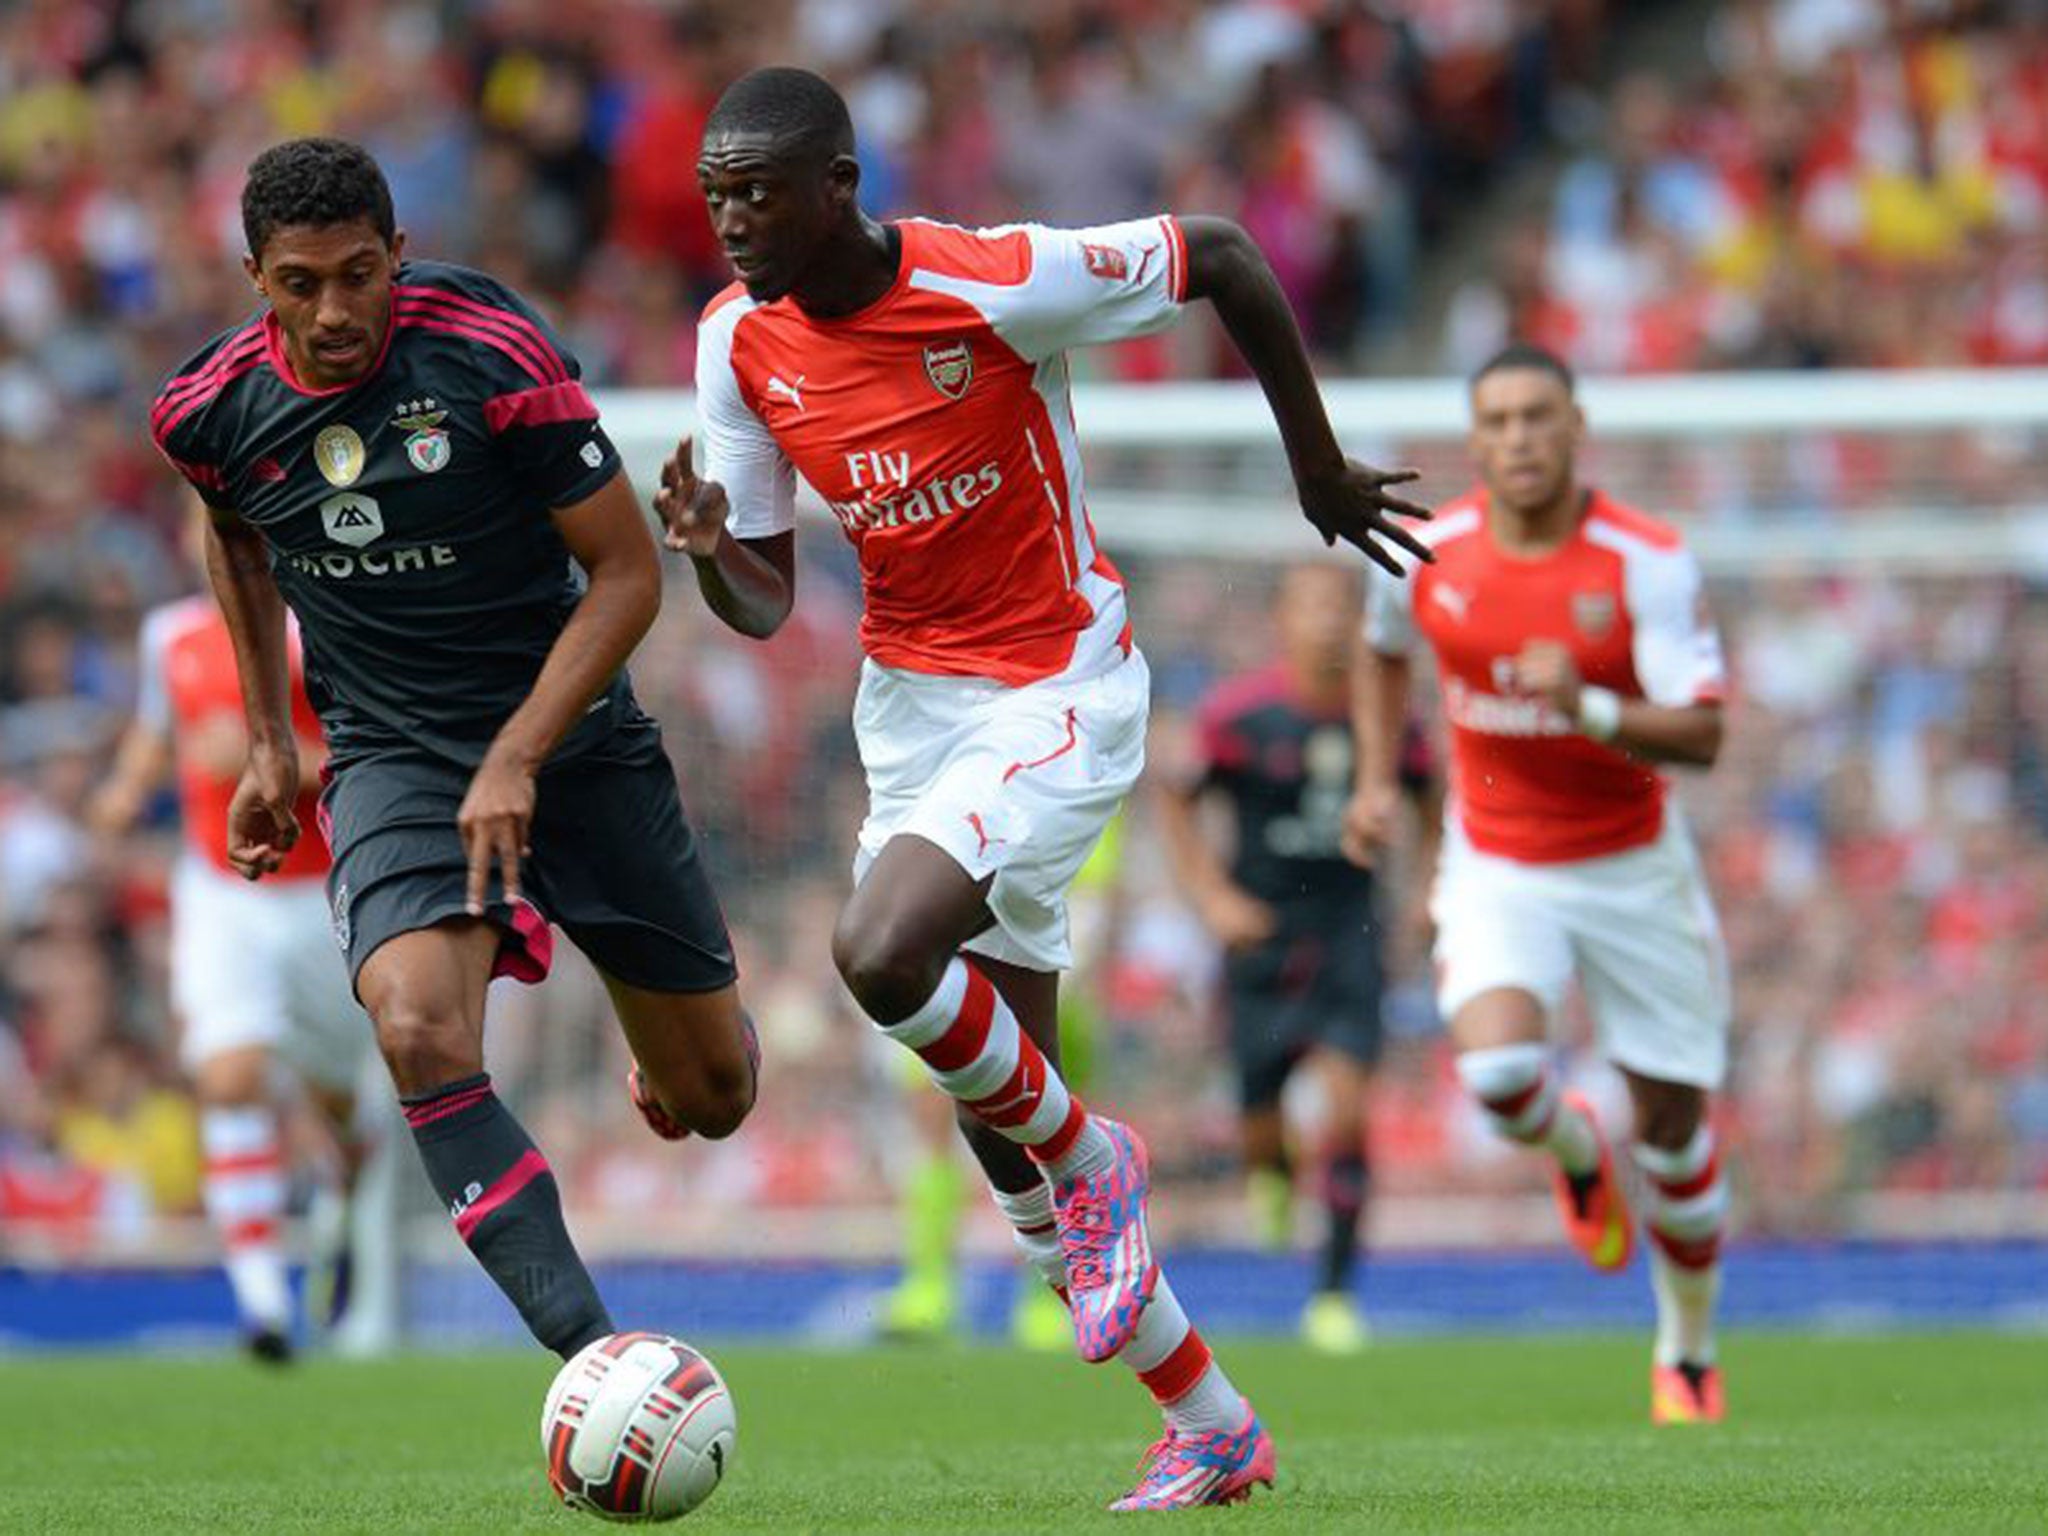 Yaya Sanogo scored four times against Benfica during Arsenal’s Emirates Cup victory on Saturday